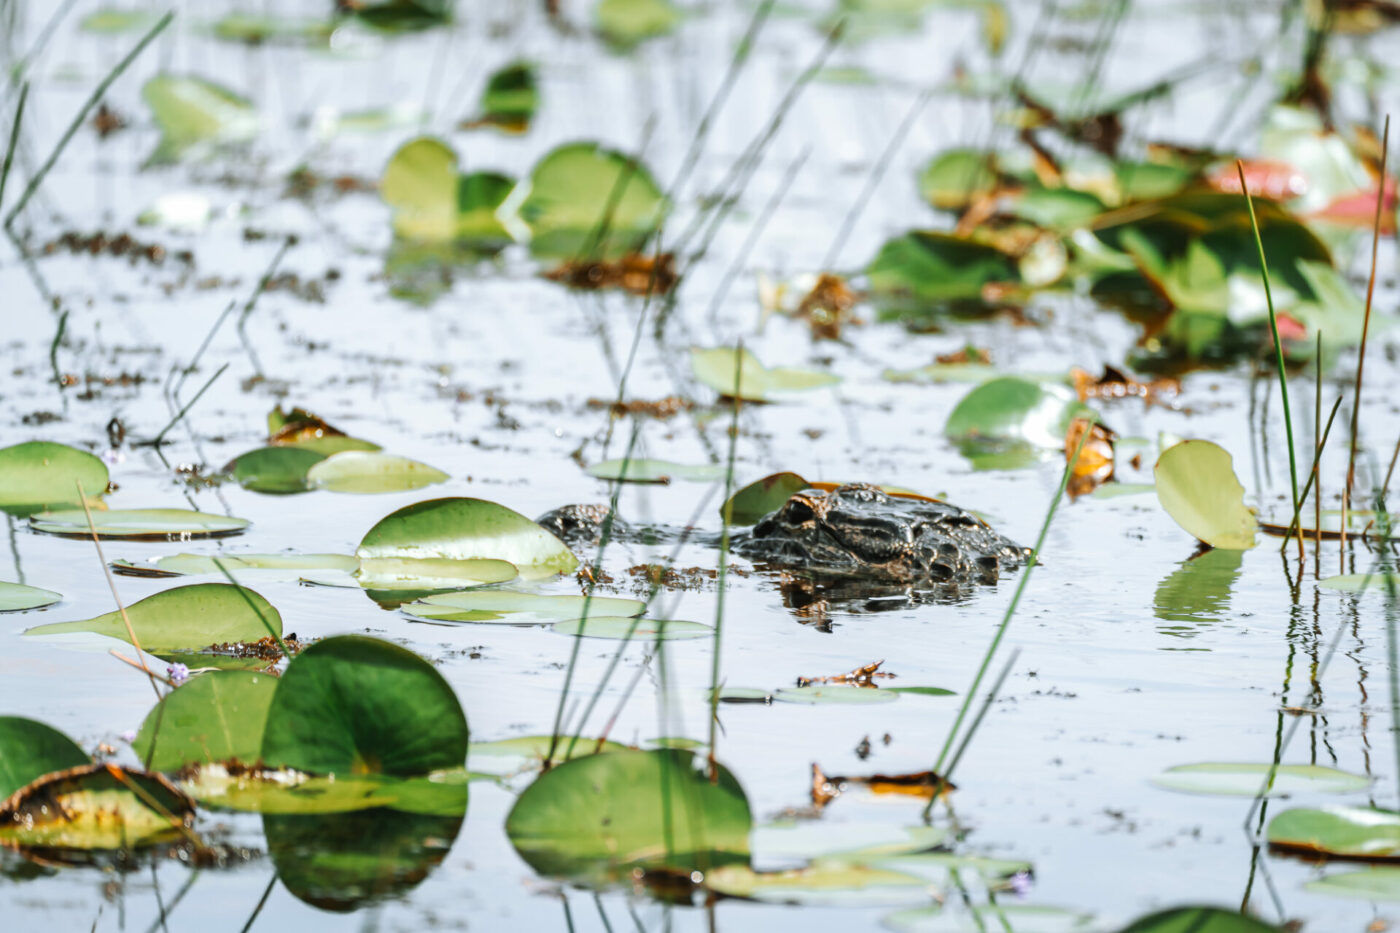 An alligator in the water in the Everglades